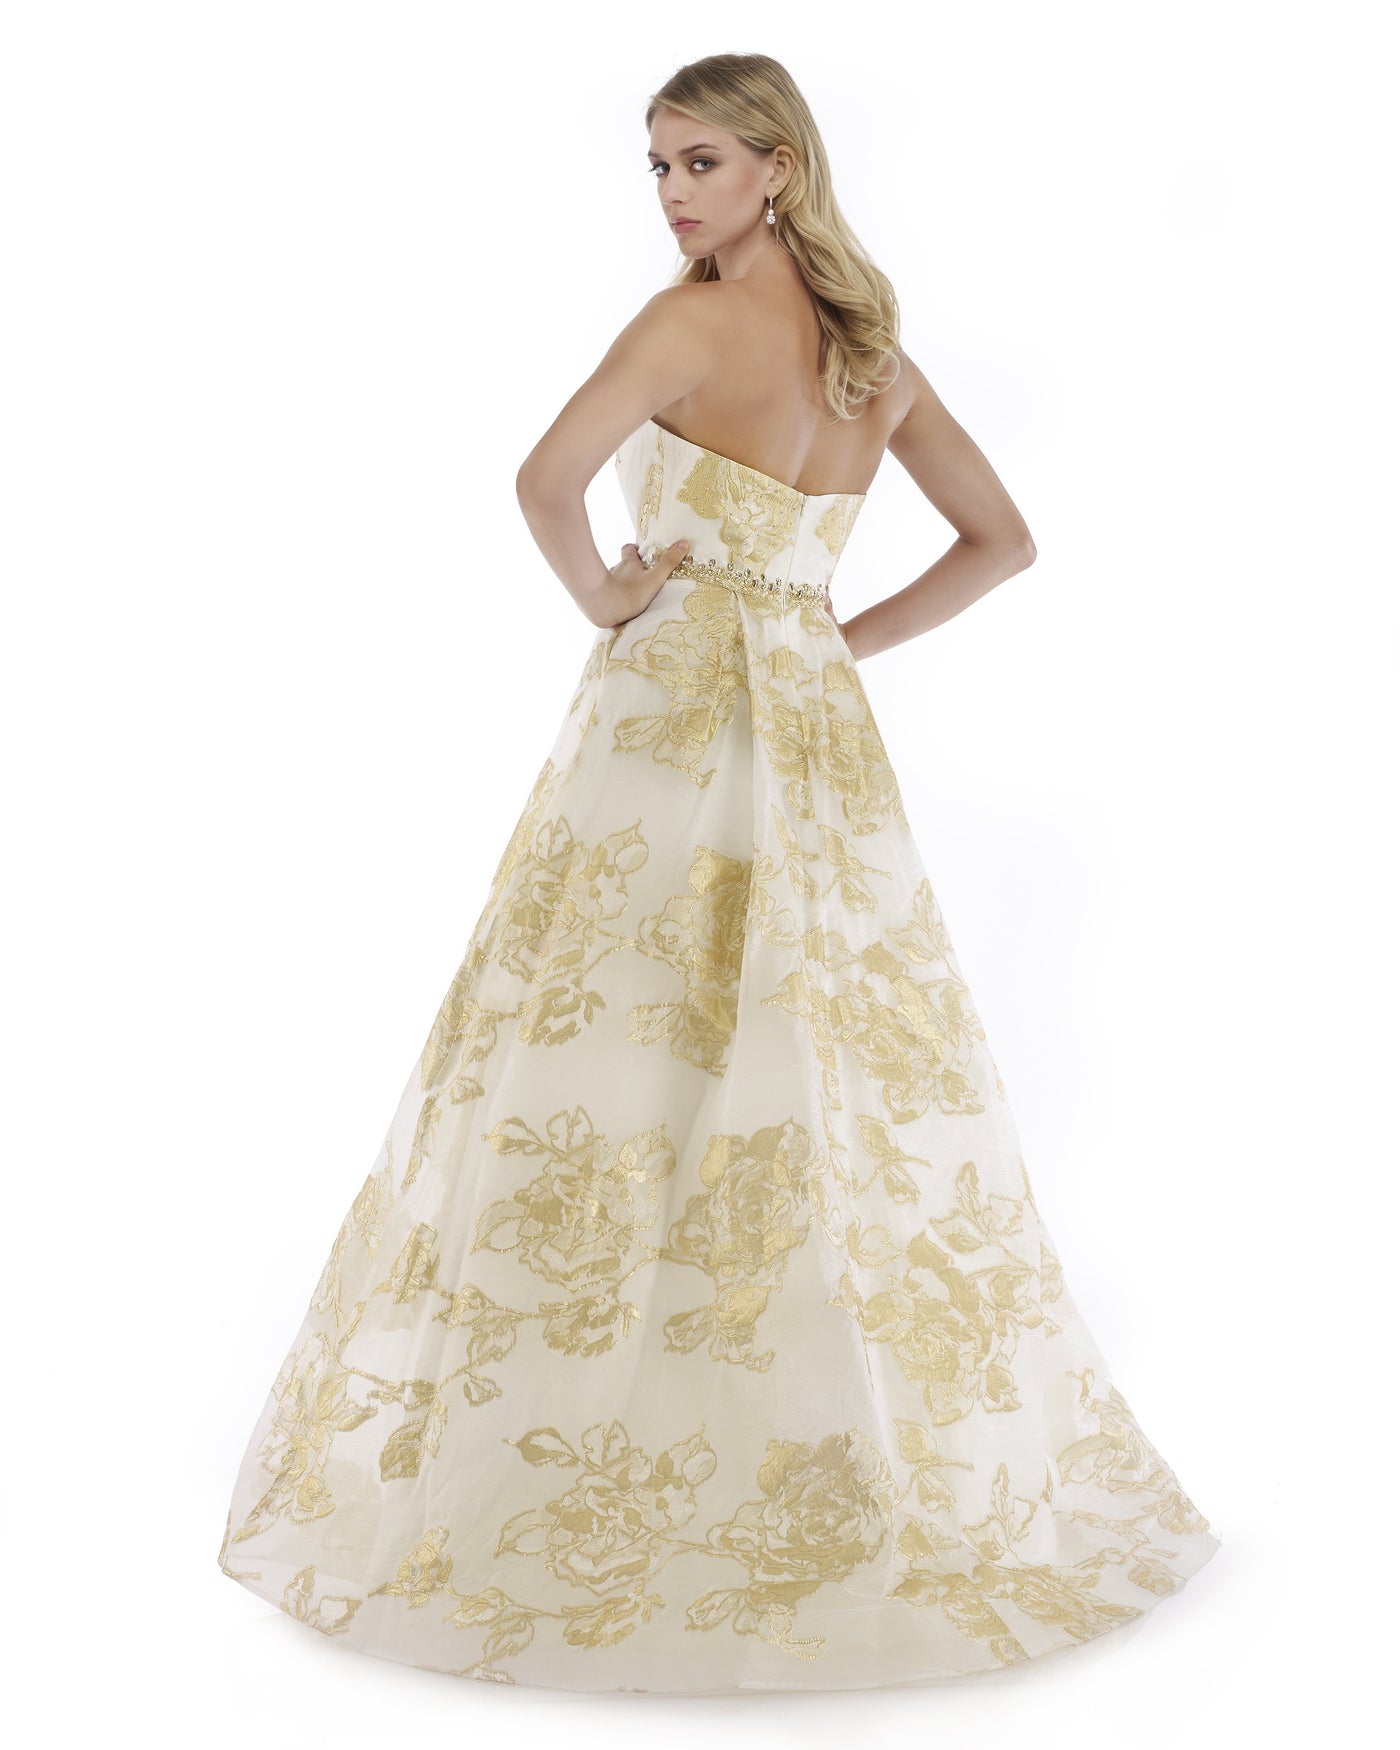 Morrell Maxie - 16049 Strapless Deep Sweetheart Brocade A-line Dress in White and Gold